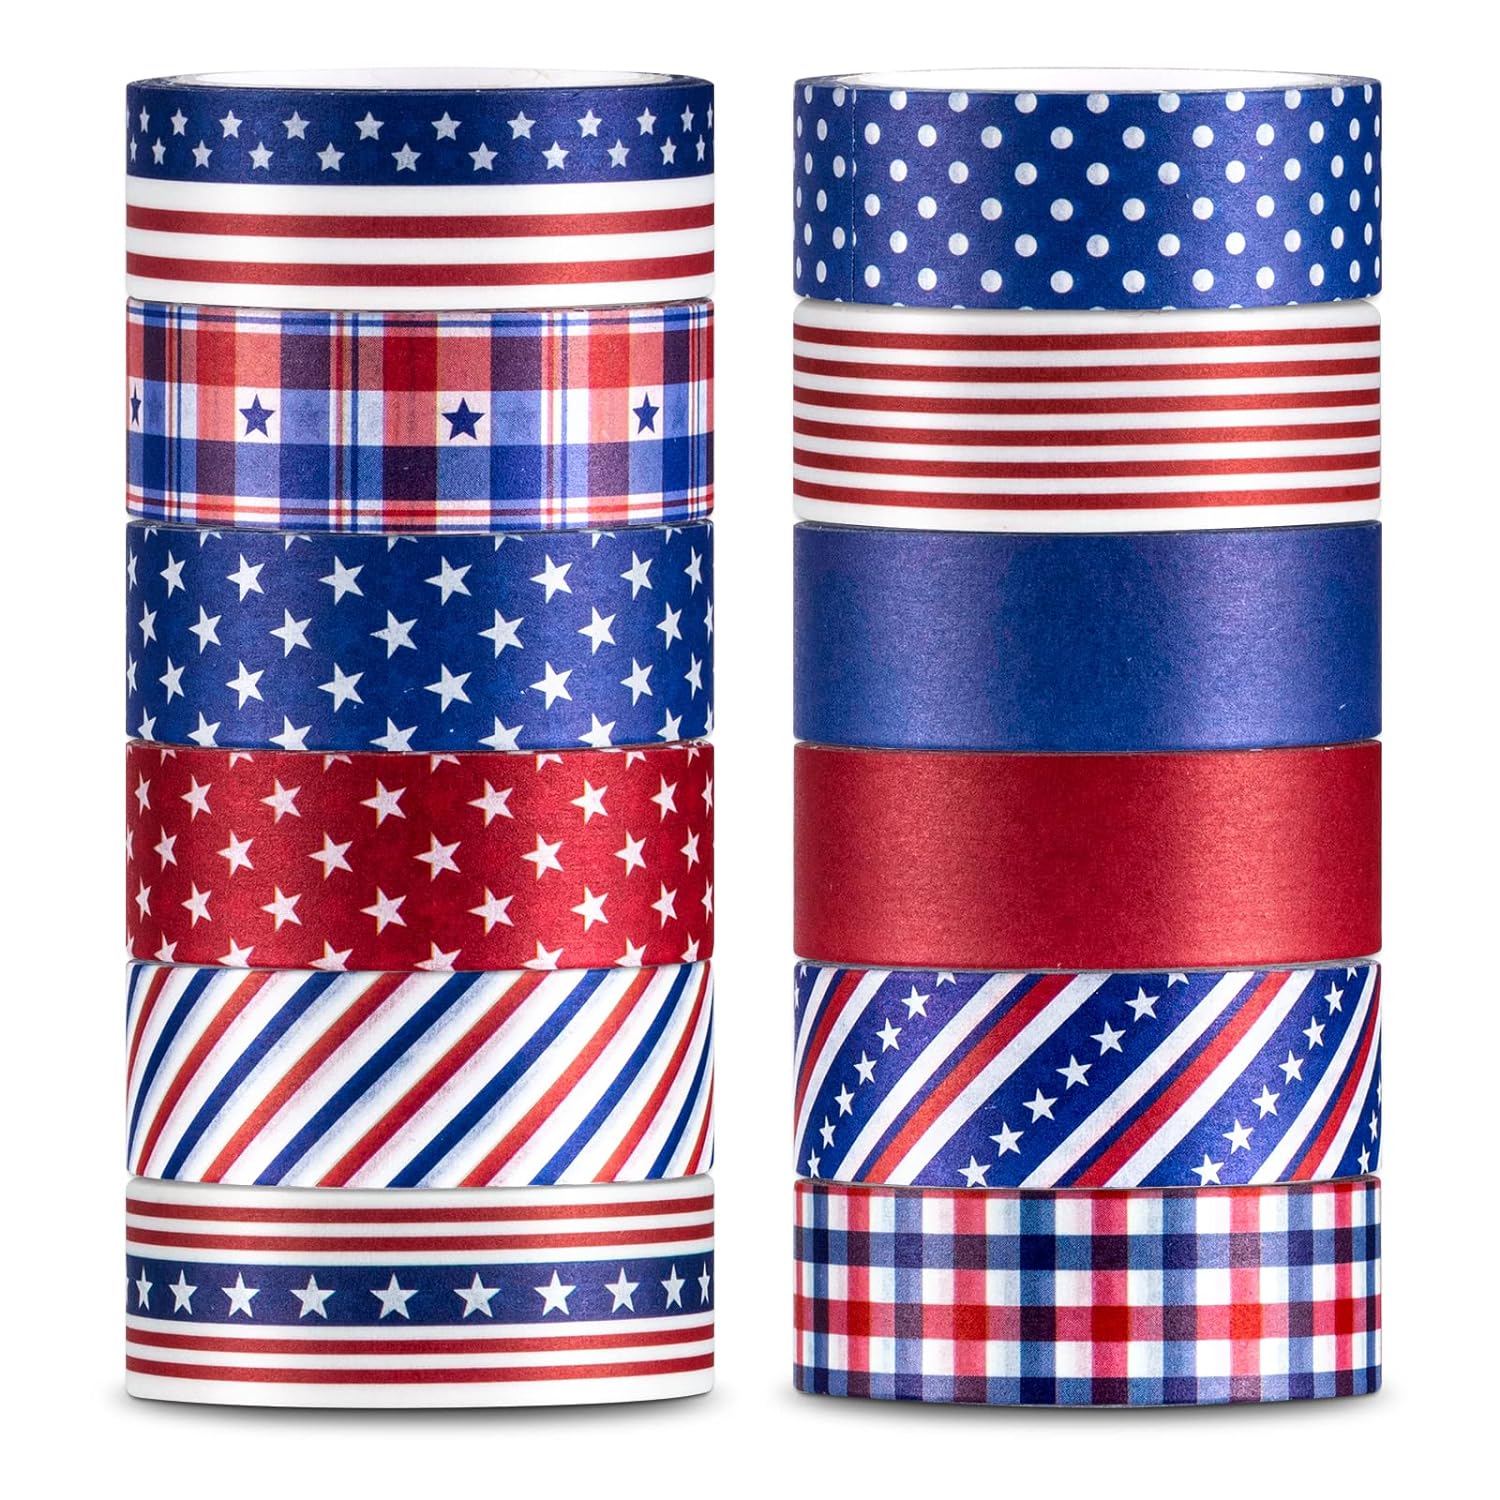 Whaline 12 Rolls 4th of July Washi Tape Patriotic Stars Stripes Washi Masking Tape Red Blue White Plaids Decorative Paper Stickers for Independence Day Scrapbook Gift Wrapping DIY Art Crafts